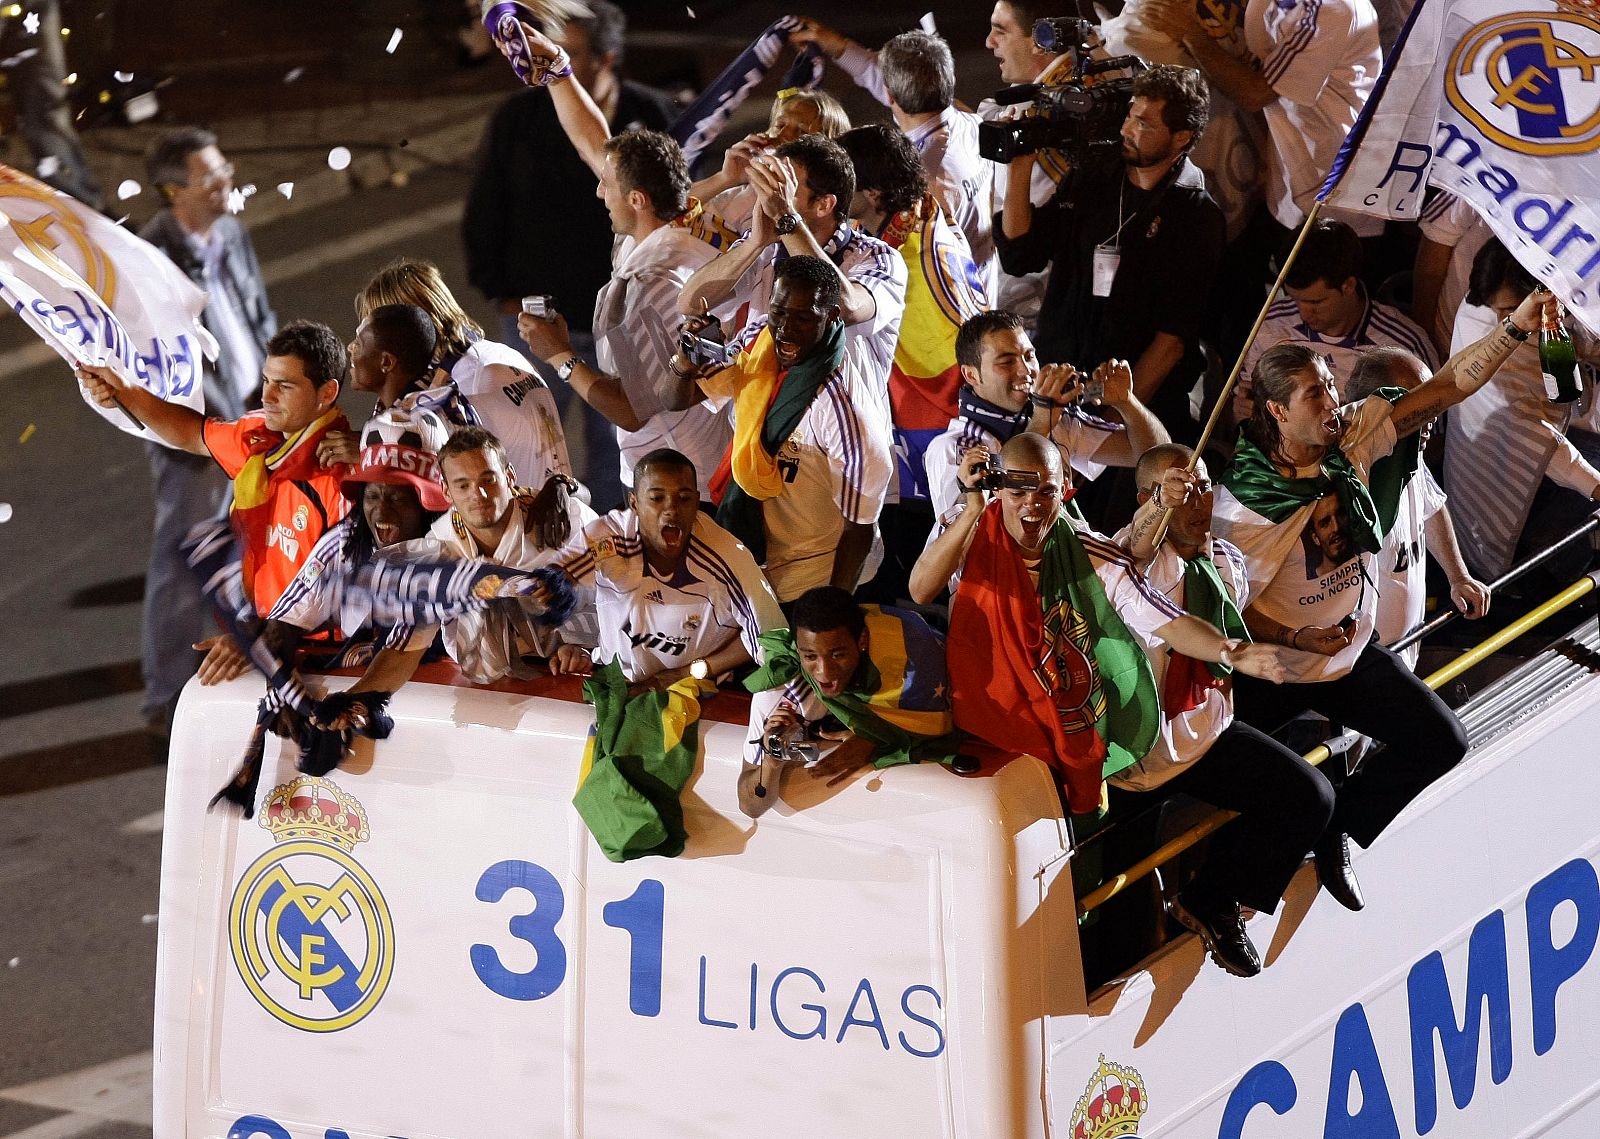 Real Madrid's players celebrate on board an open-top bus at Cibeles fountain in central Madrid